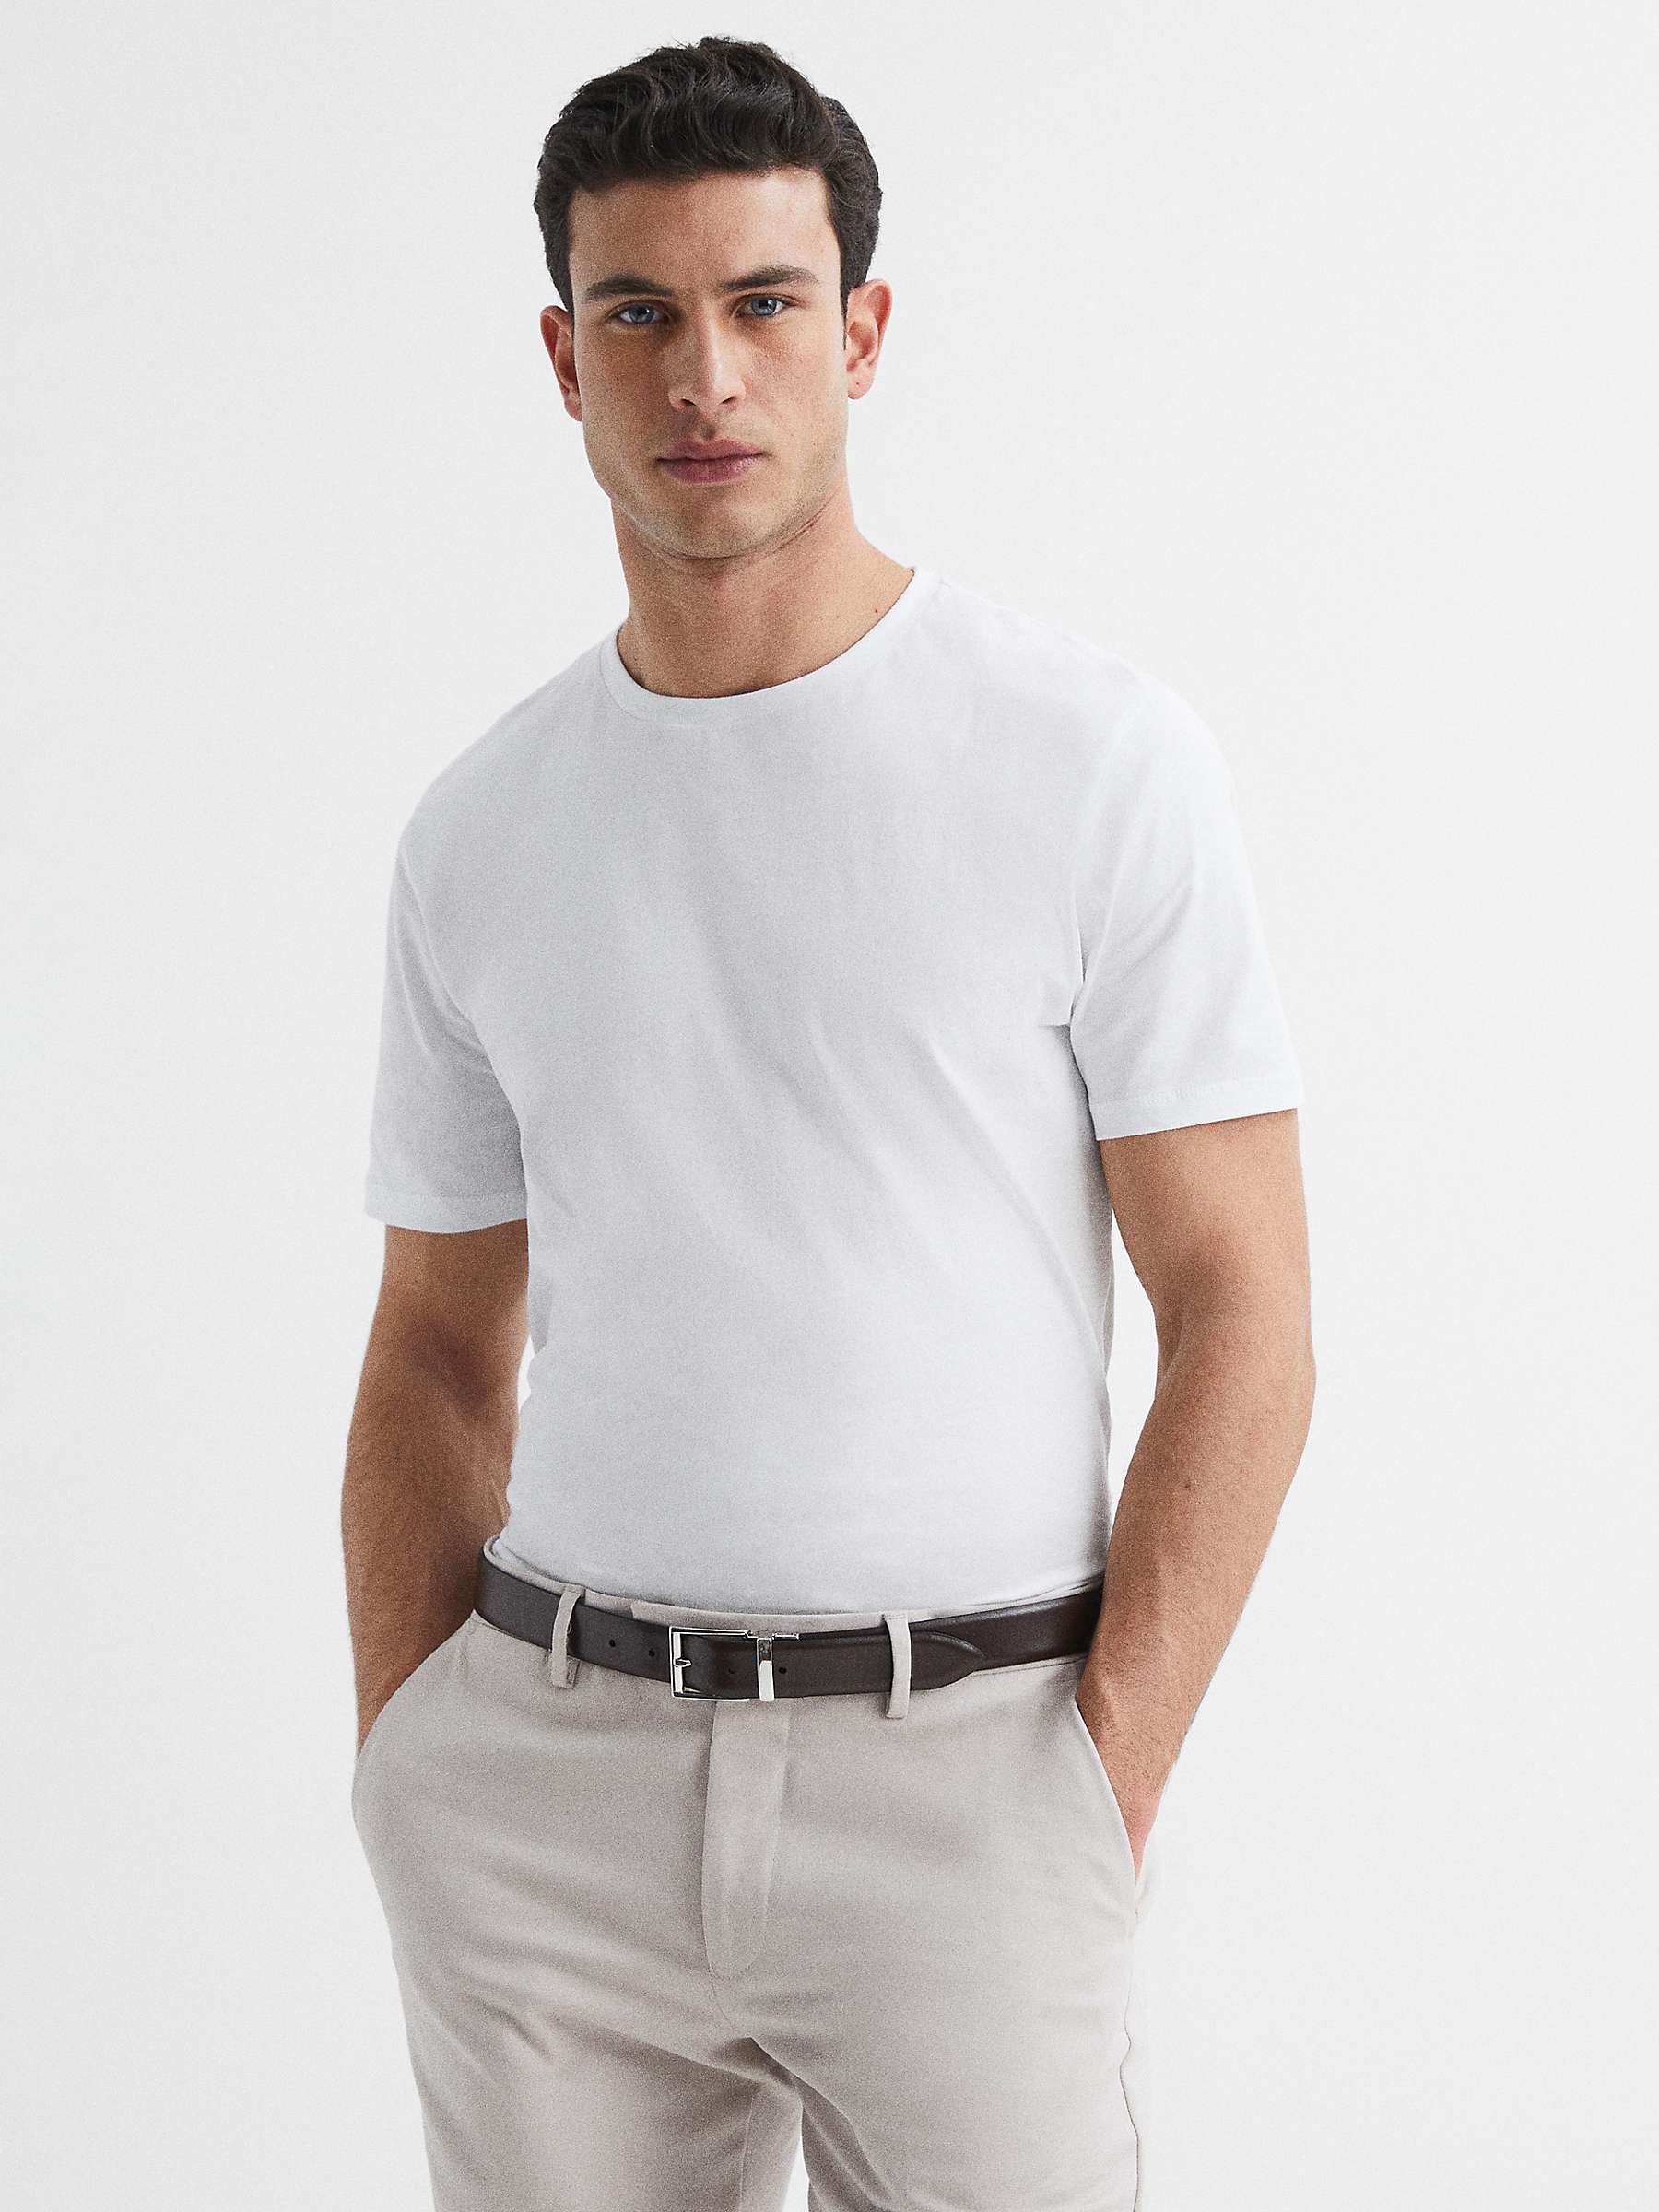 Buy Reiss Bless Crew Neck T-Shirt, Pack of 3 Online at johnlewis.com